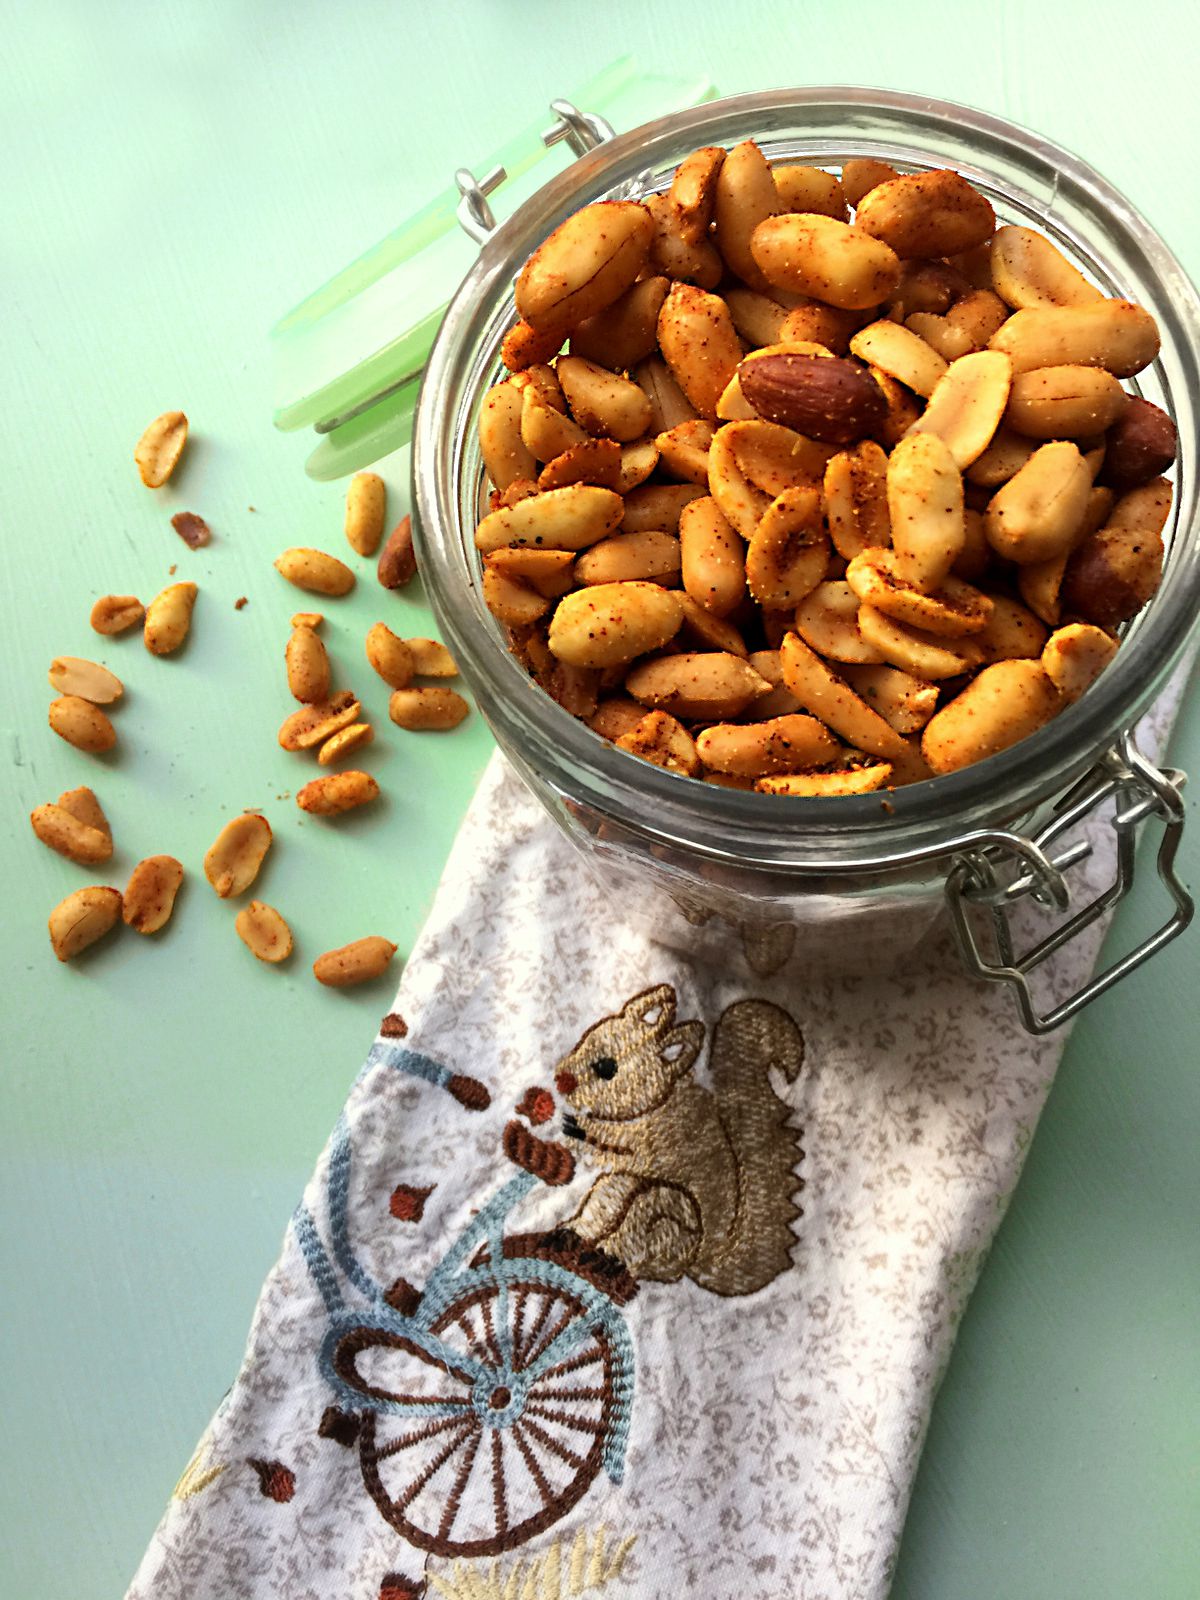 The Perfect Holiday Snack: Spiced Peanuts